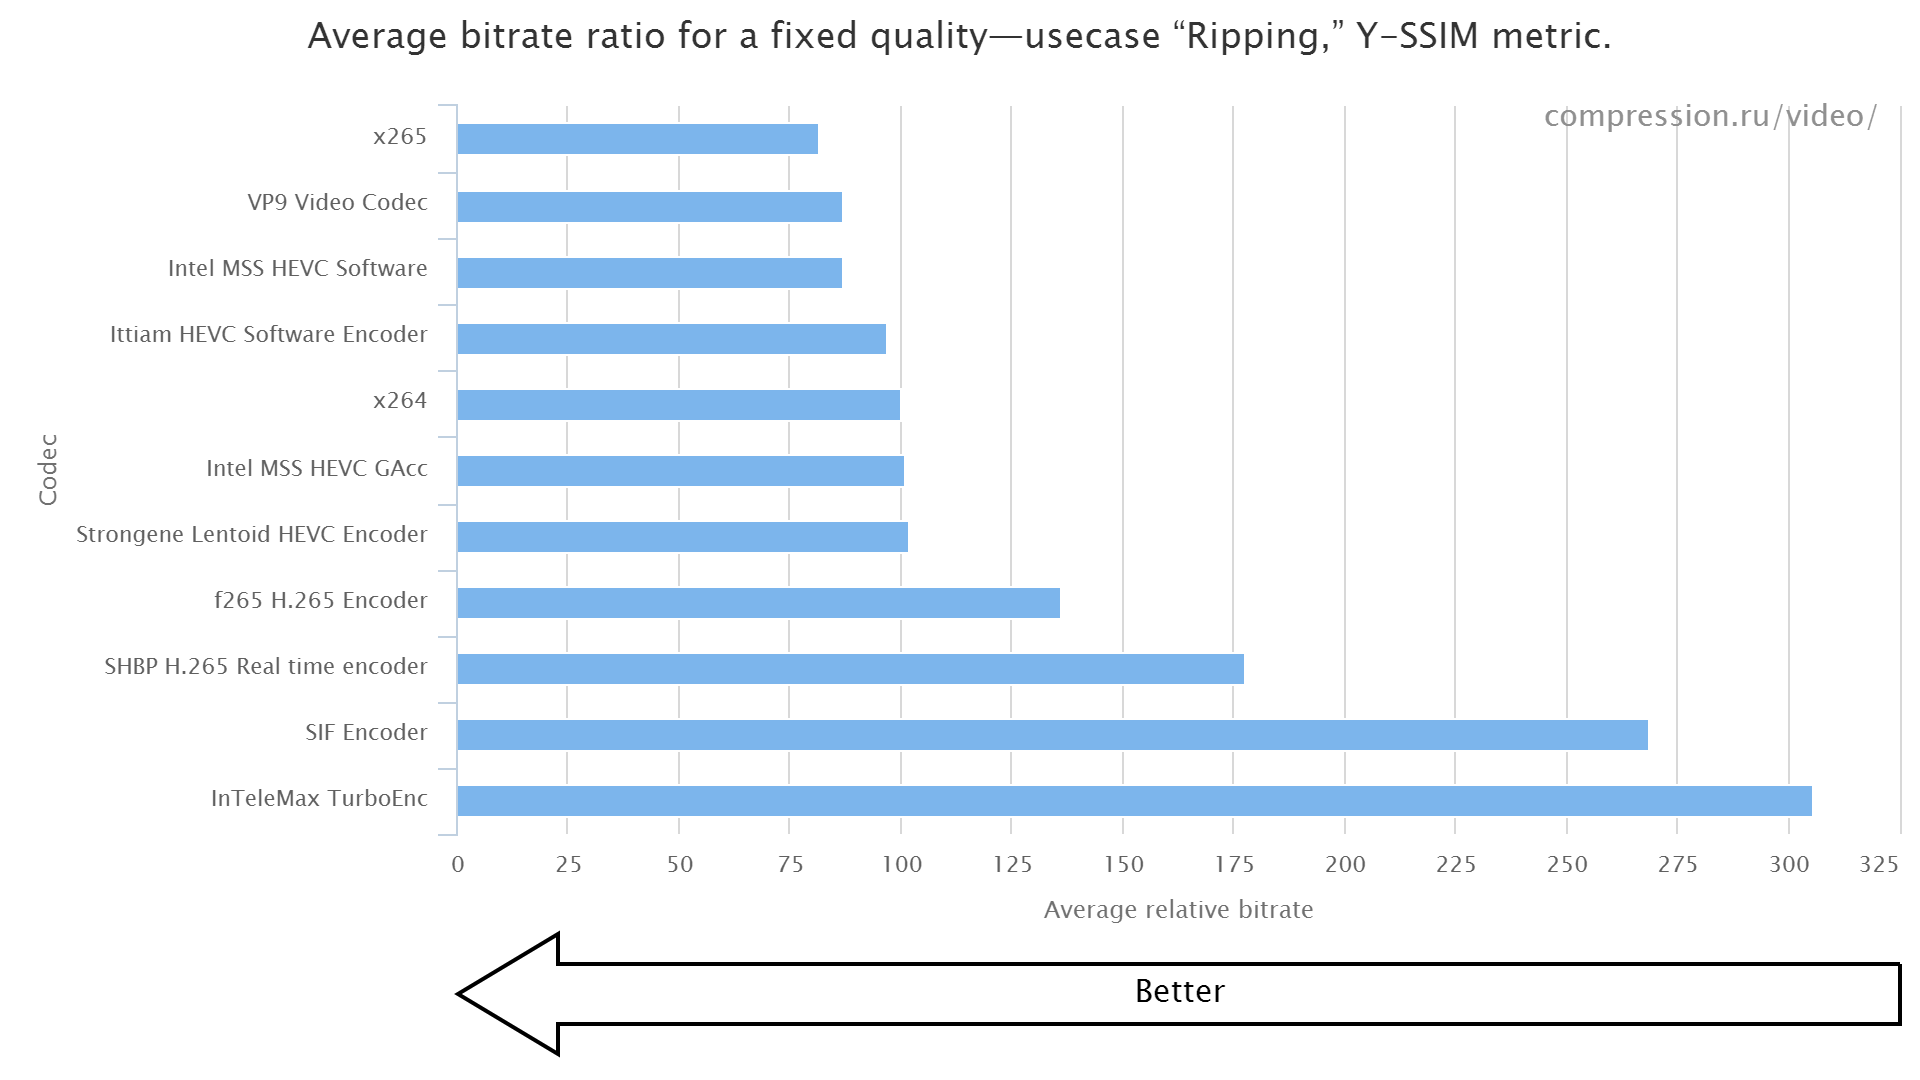 Average bitrate for Fast transcoding use-case (Y-SSIM metric)